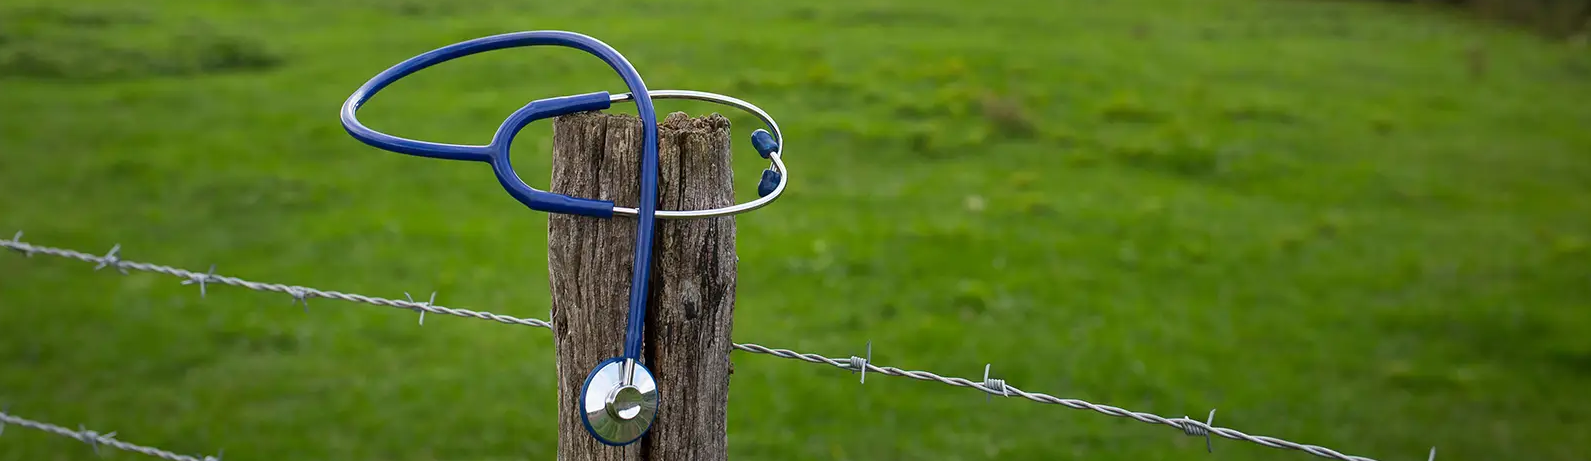 a stethoscope placed on a wooden fence post in front of a field